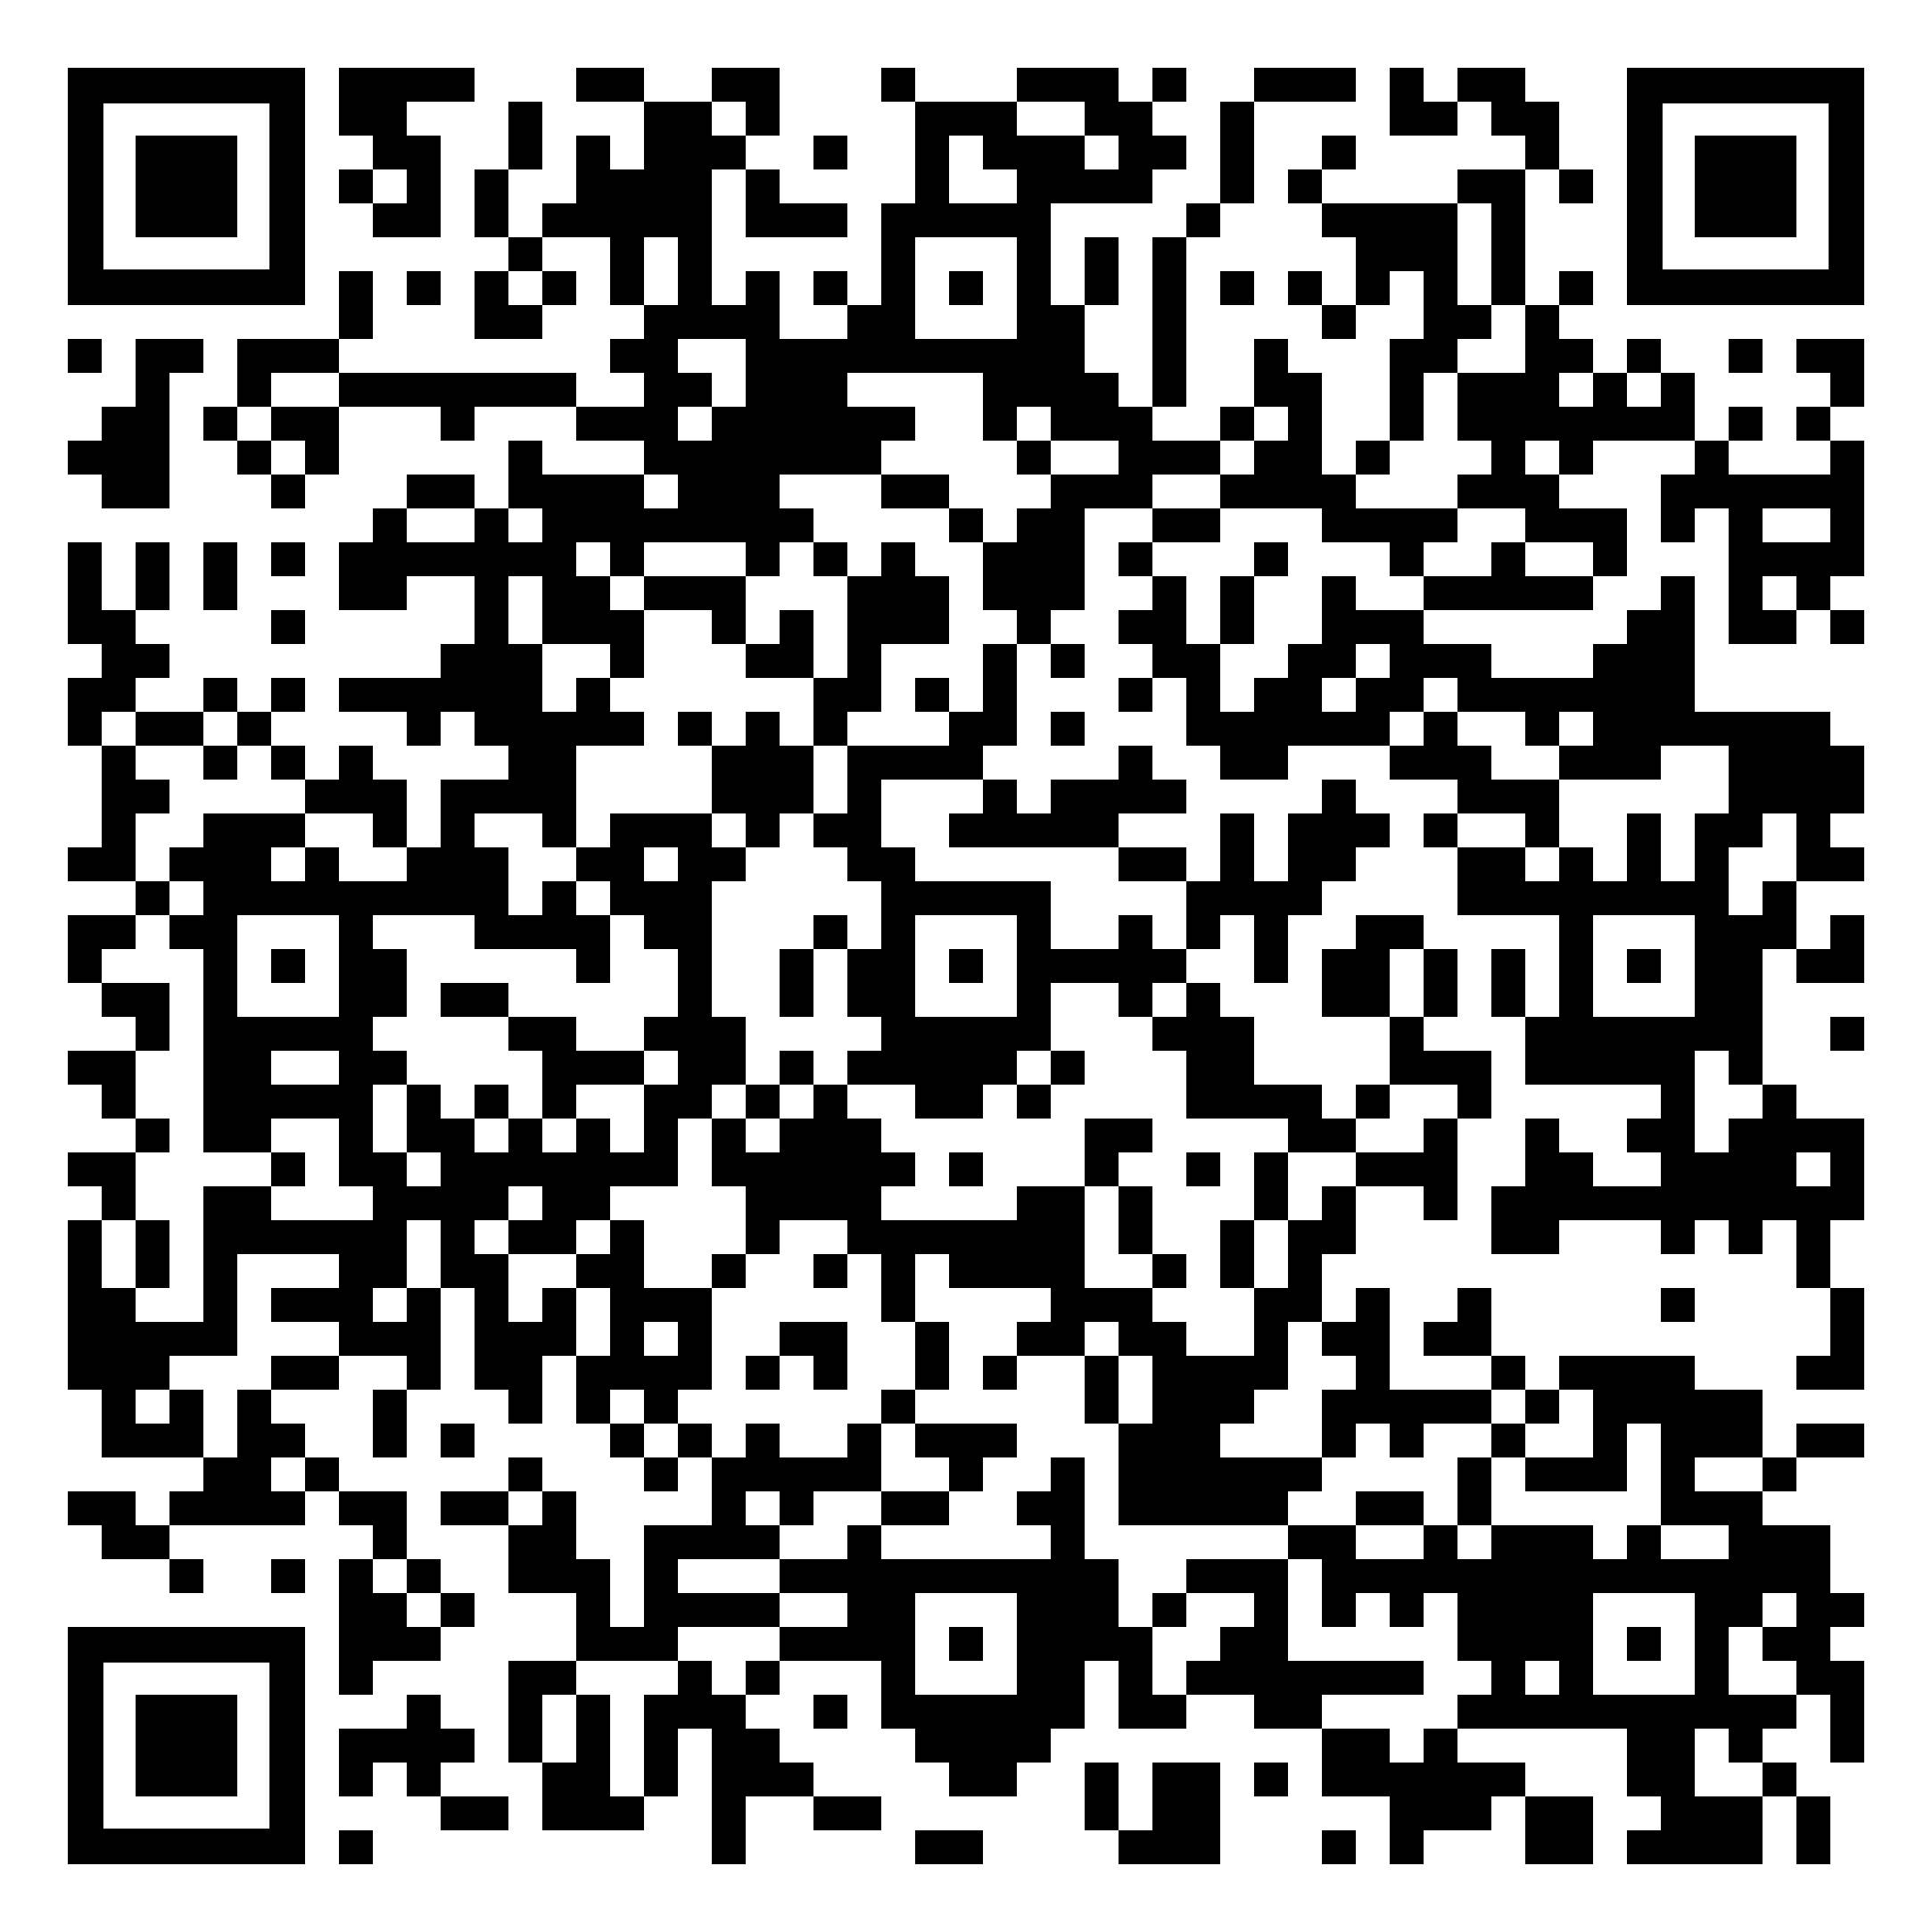 ACCEPTED ON ANY QR CODE